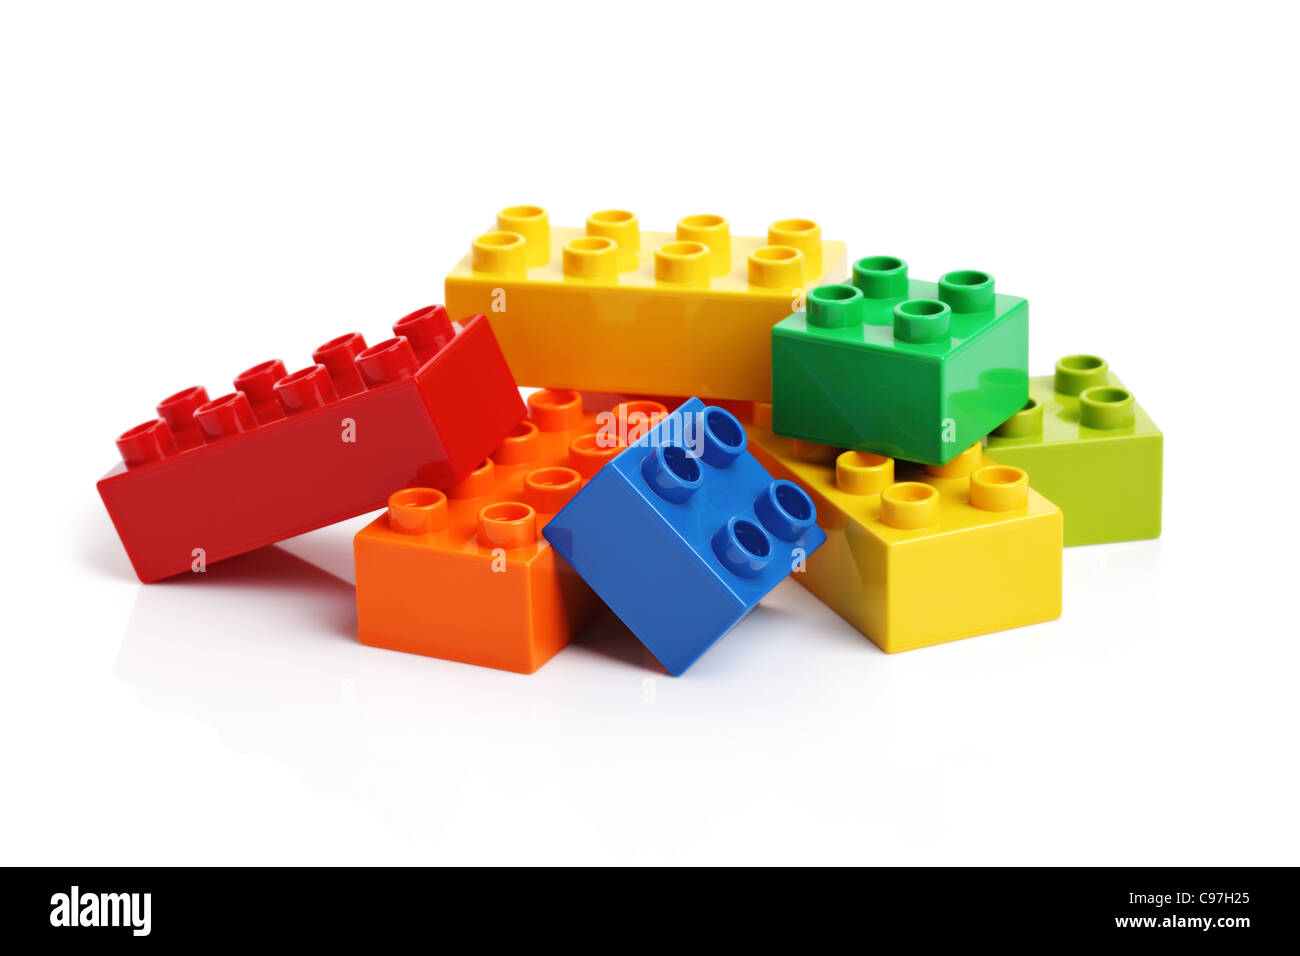 Building blocks on a white background Stock Photo